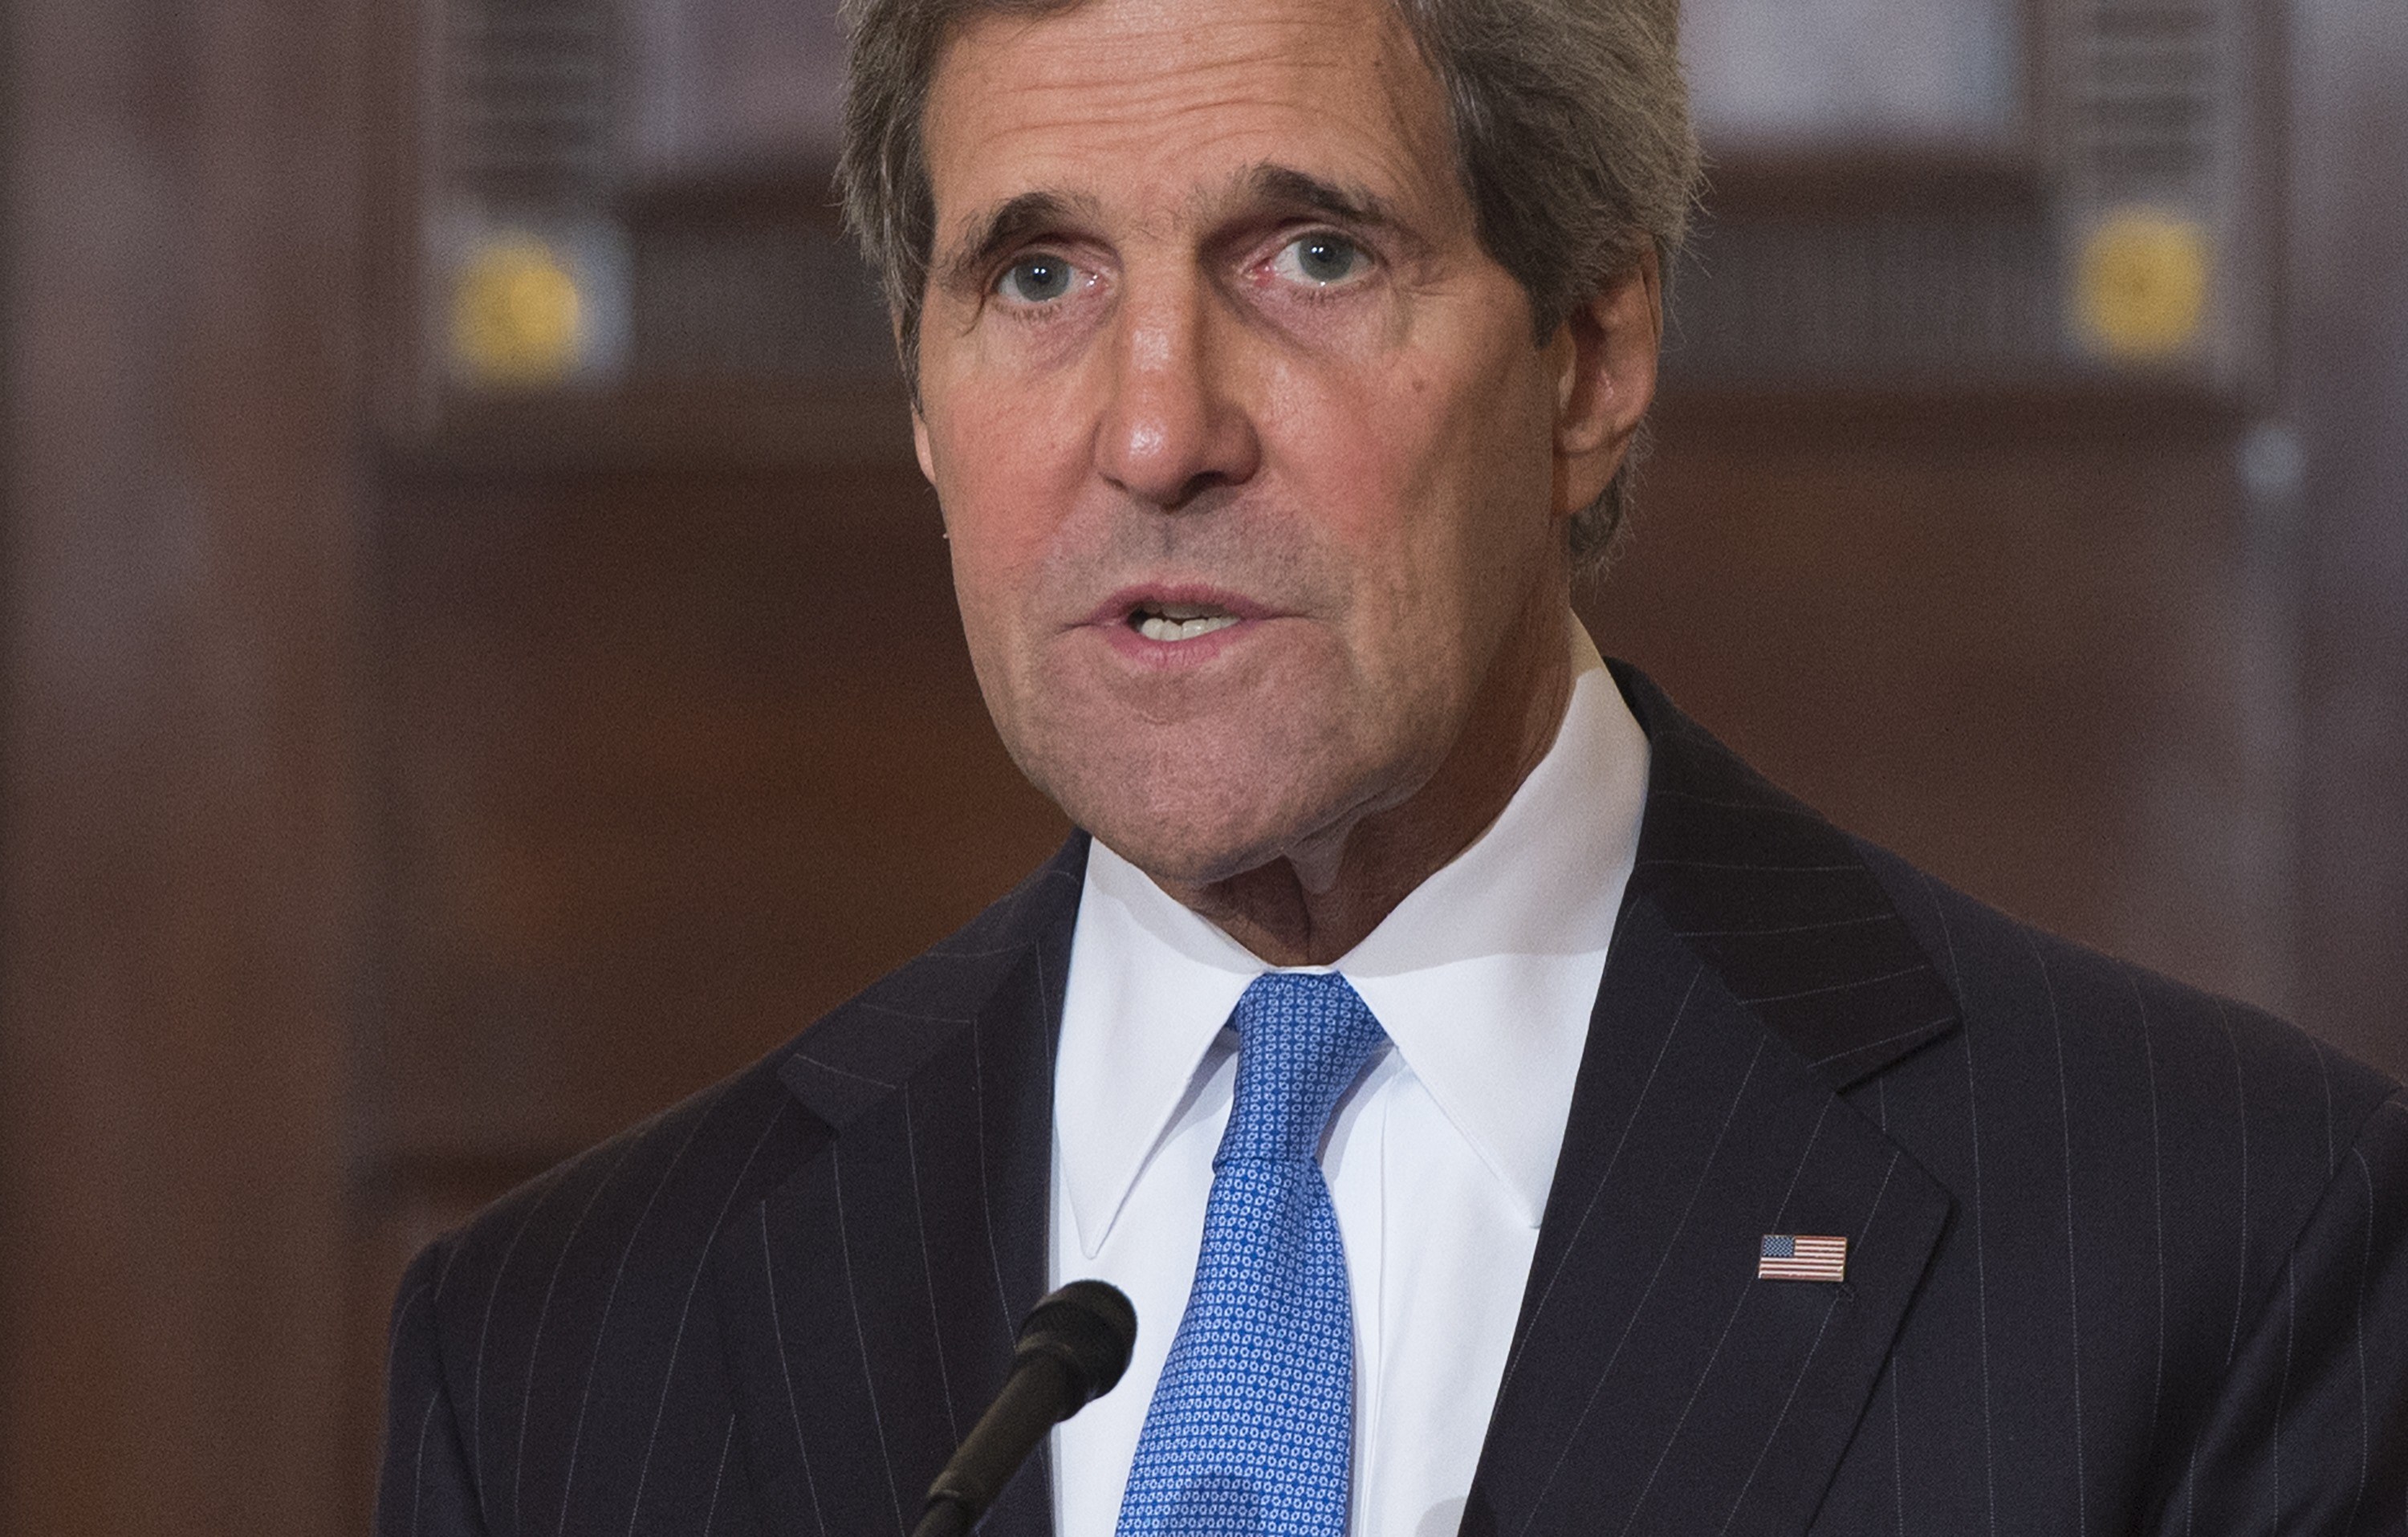 U.S. Secretary of State John Kerry speaks about the kidnapped school girls by the Nigerian terrorist organization Boko Haram, during a press availability at the U.S. State Department in Washington, DC, May 8, 2014. (SAUL LOEB&mdash;AFP/Getty Images)